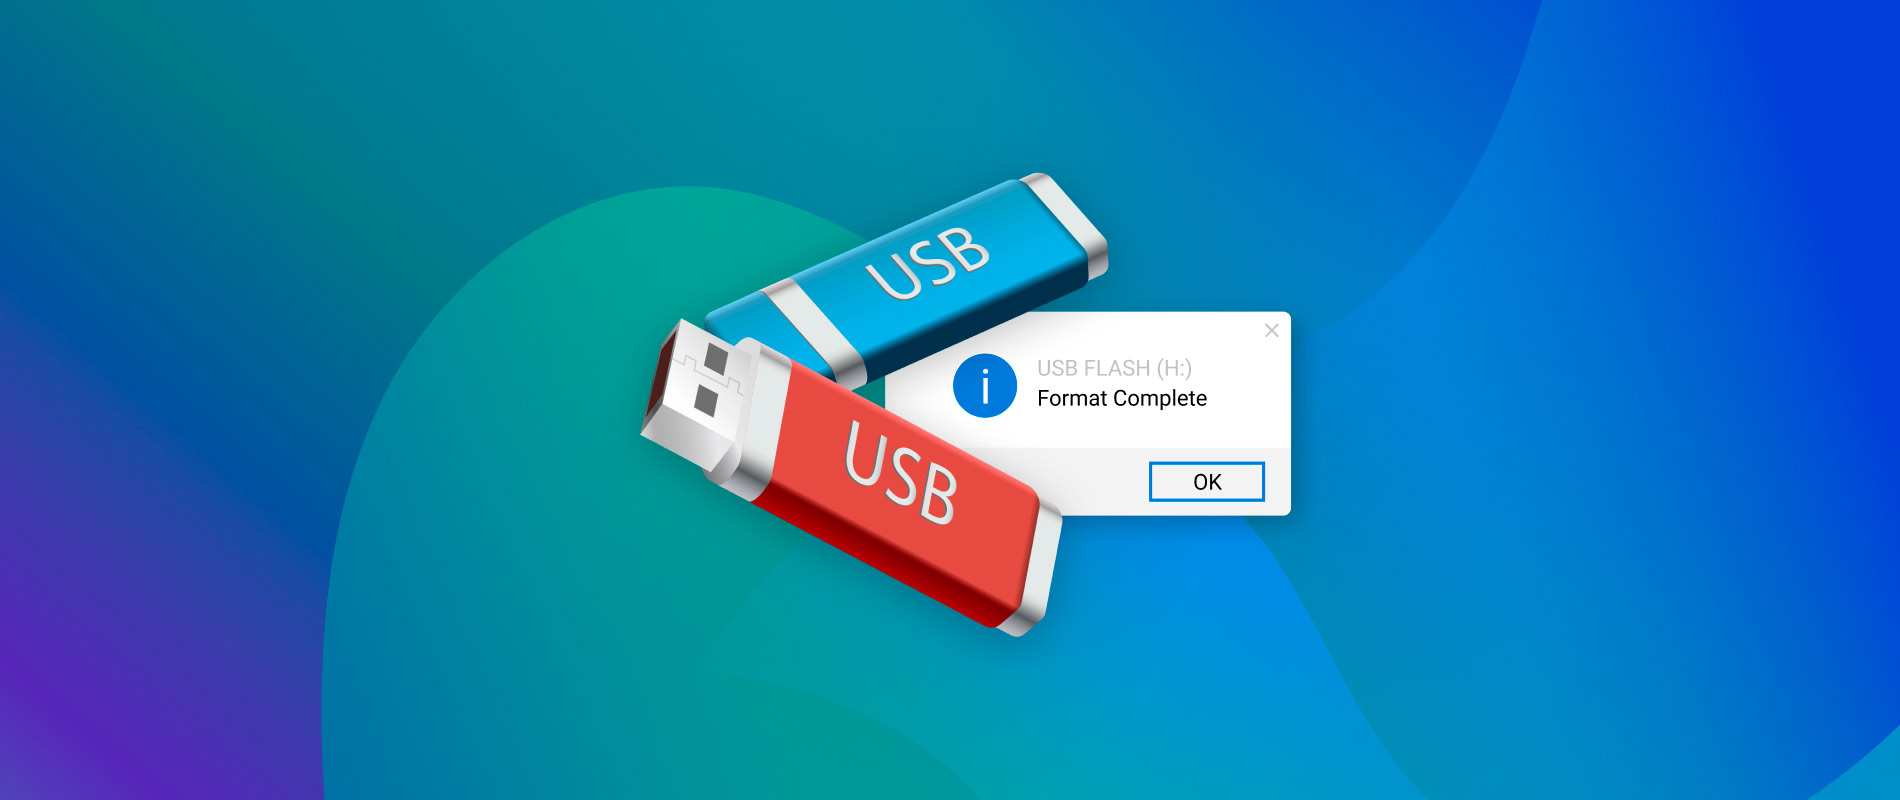 Carelessness Misuse Score How to Recover Data From a Formatted USB Drive (2022)